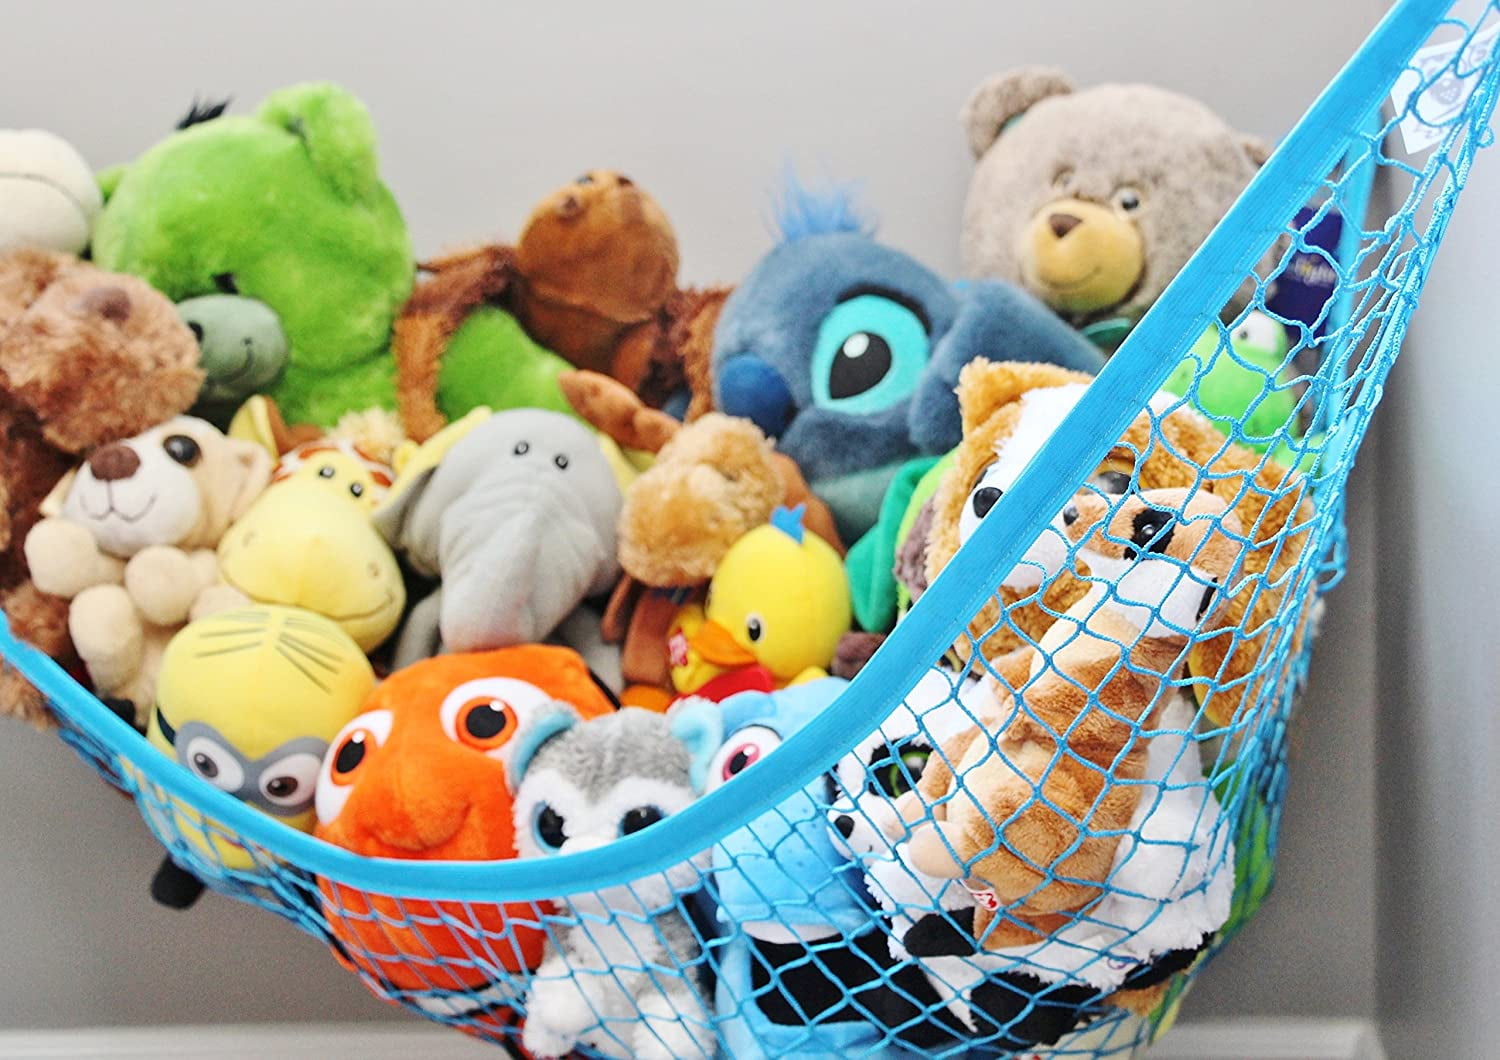 Stuffed Animals Toy Net Hammock,with 3 Pcs Suction Cups,for Neatly Organize Kids Plush Toys and Save Space,180x120x120 cm 1 Pcs Stuffed Animal Storage Hammock 